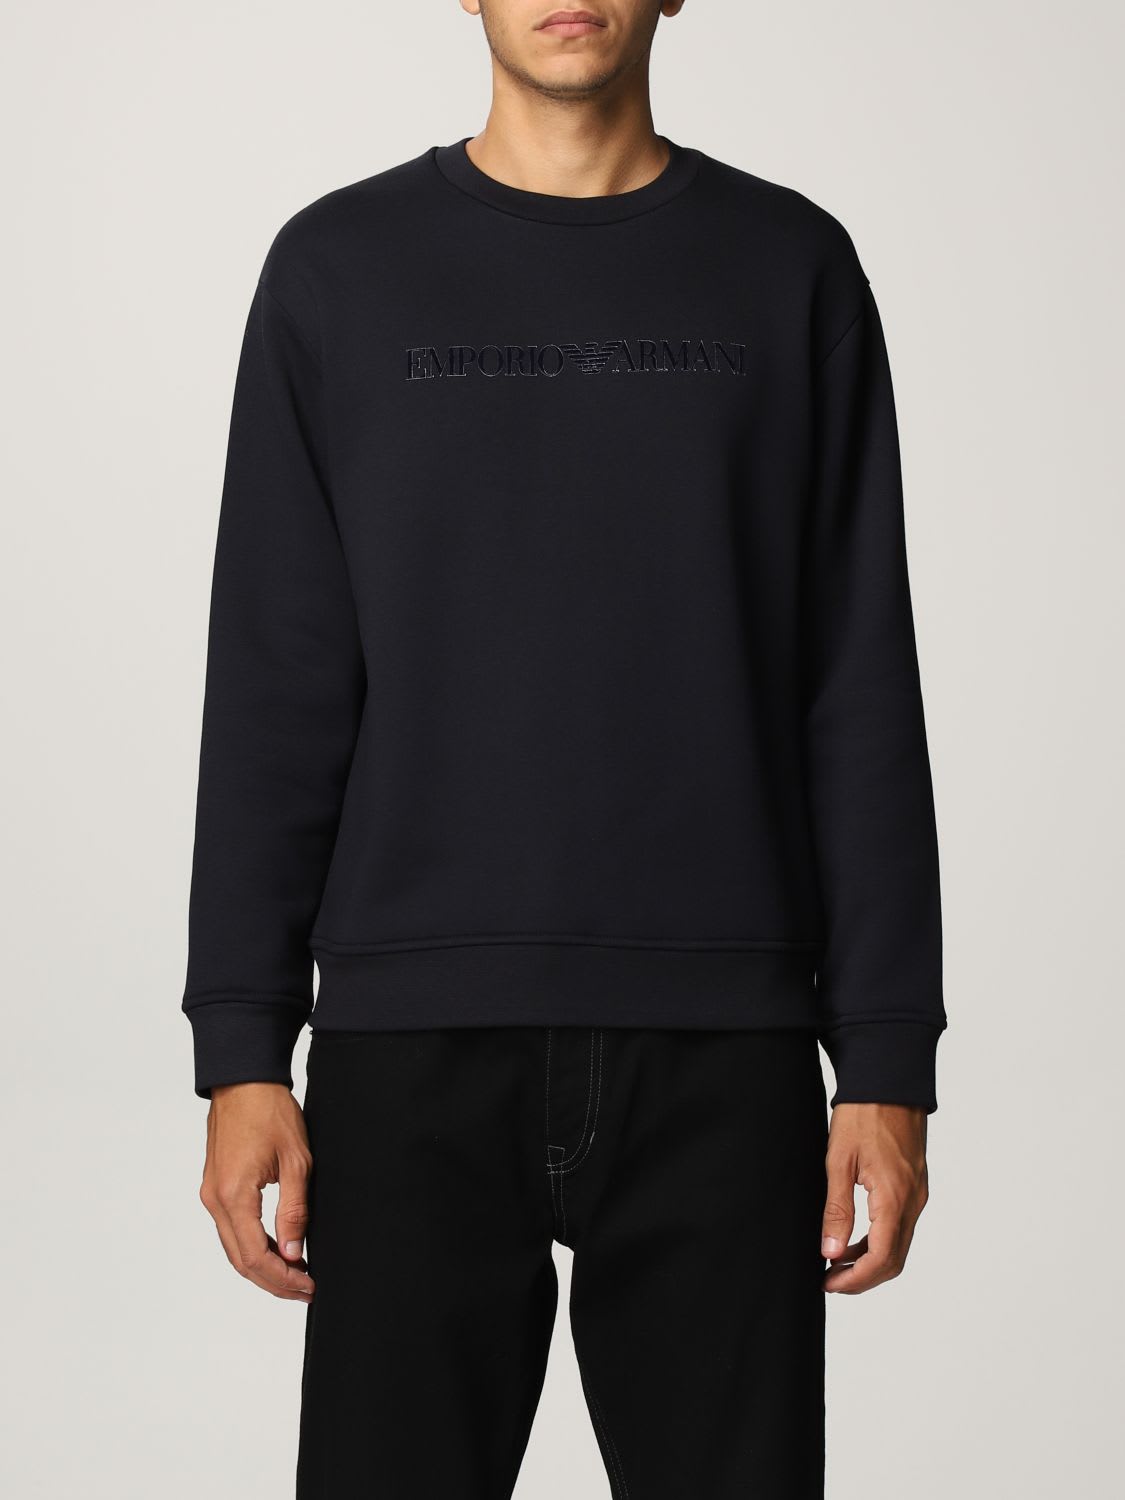 Emporio Armani sweatshirt Emporio Armani sweatshirt in cotton and modal